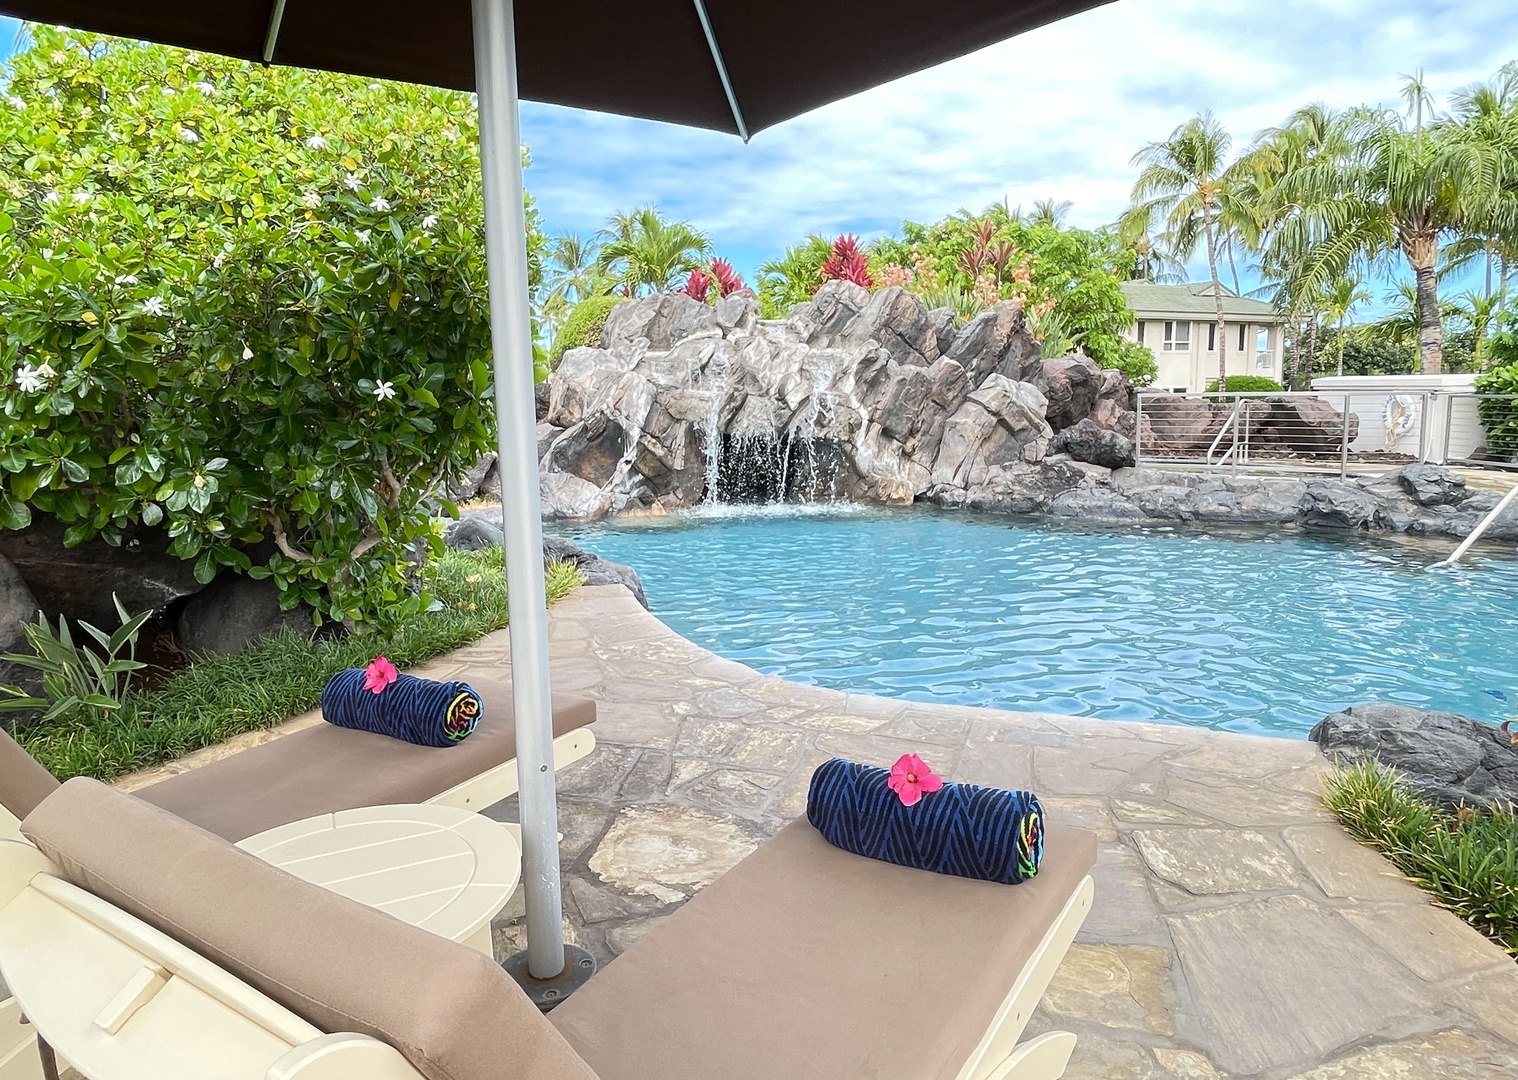 Kamuela Vacation Rentals, The Islands D3 - Imagine Yourself Poolside Sipping Your Favorite Beverage!